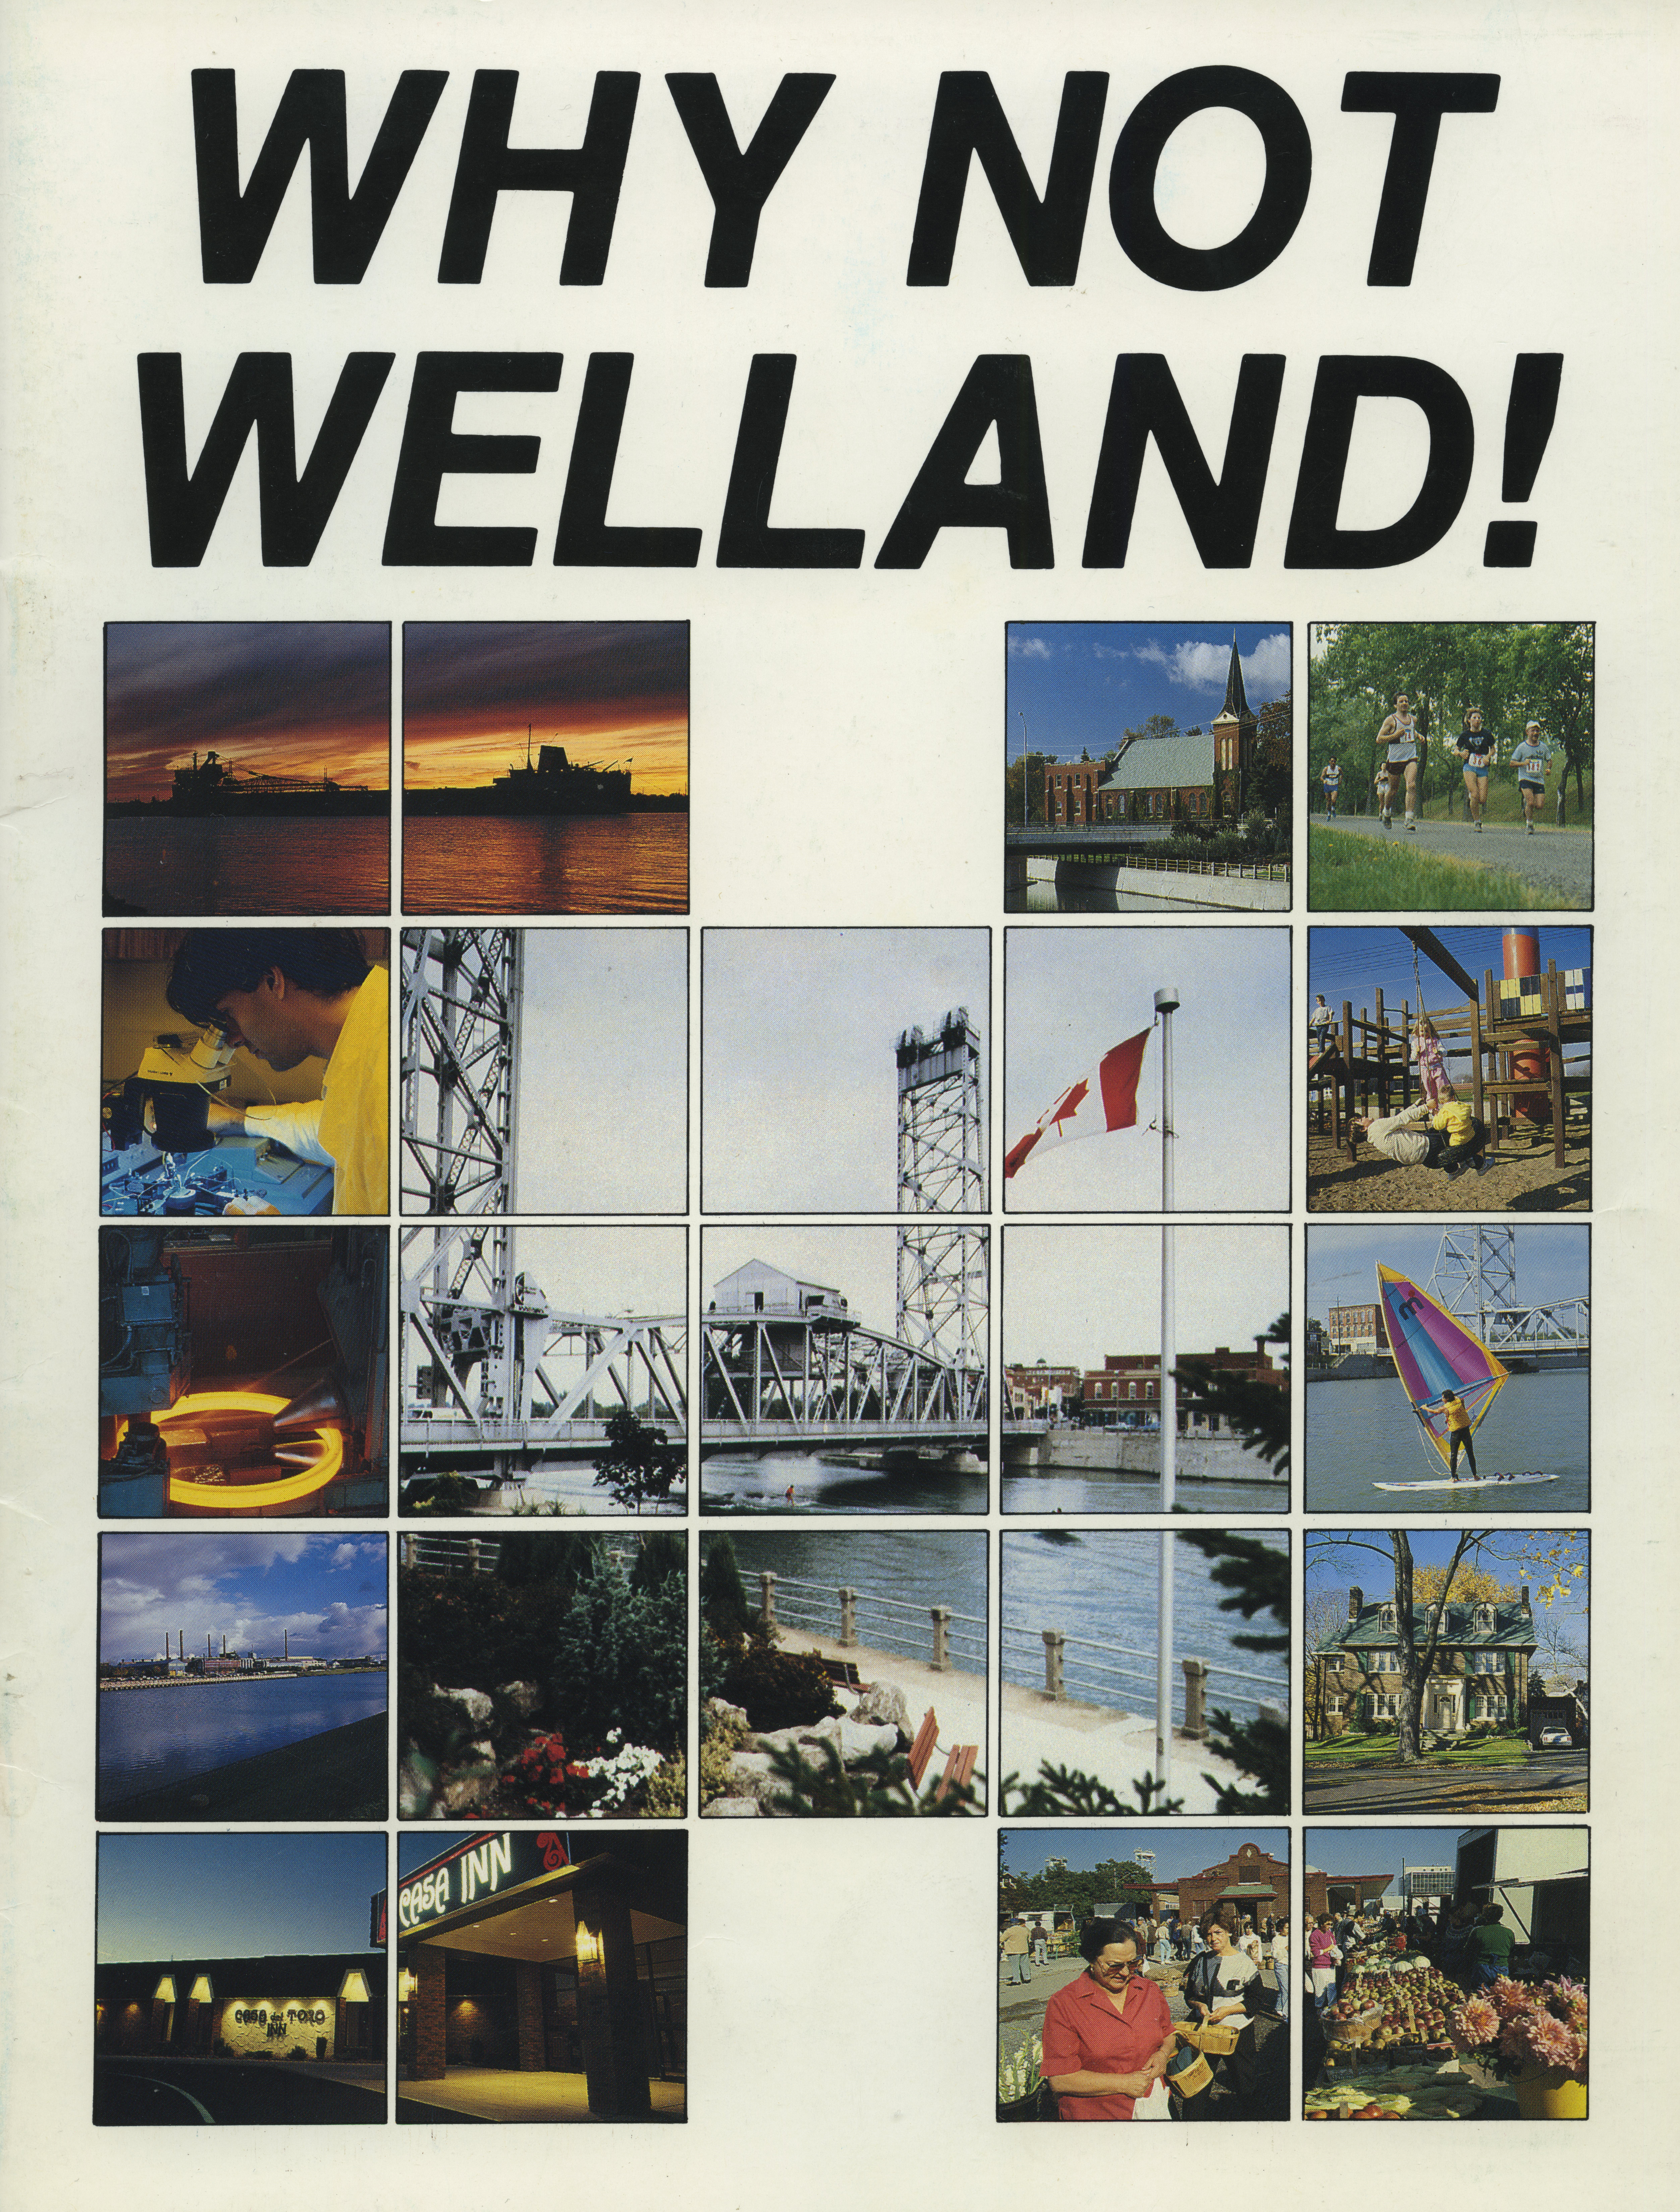 The cover of a booklet which says "Why not Welland!" There is a collage of many small images.